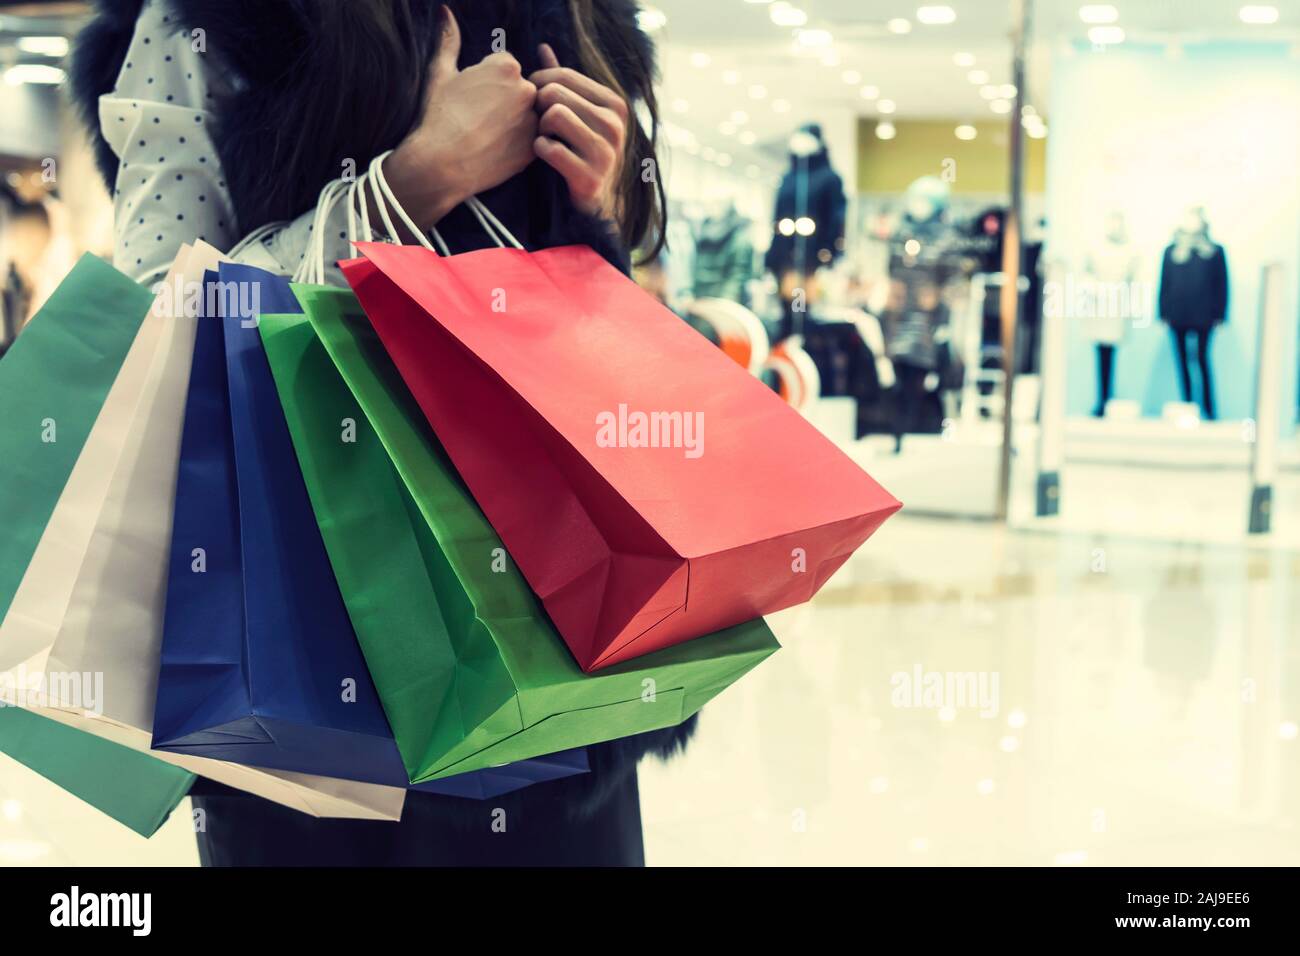 Crop unrecognizable girl clasping many shopping bags on mall background. Lady making many purchases in store. Concept of female incidentals. Looking f Stock Photo